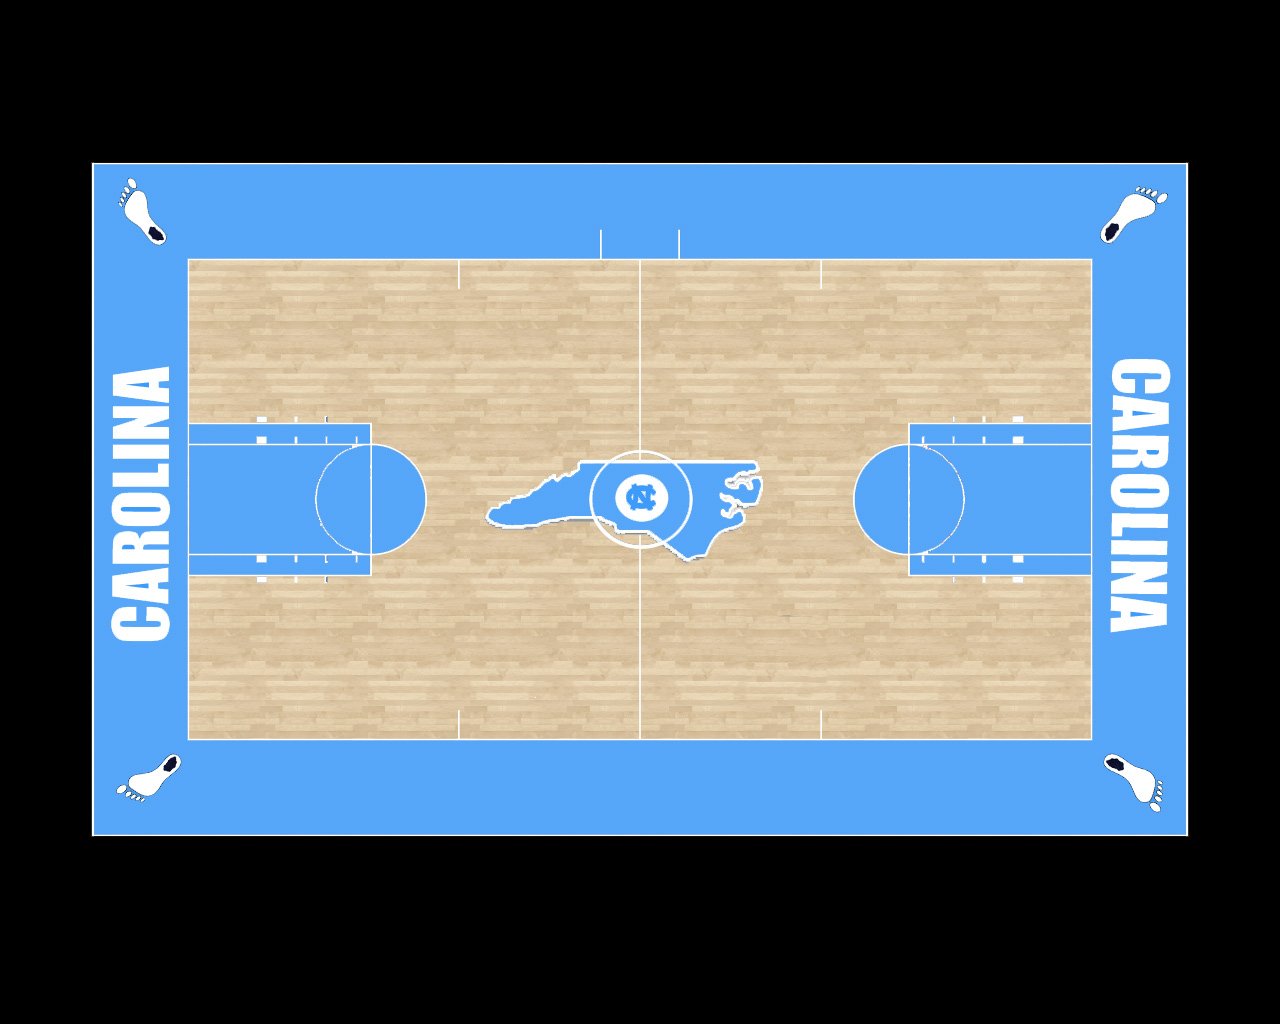 basketball court wallpaper layouts backgrounds